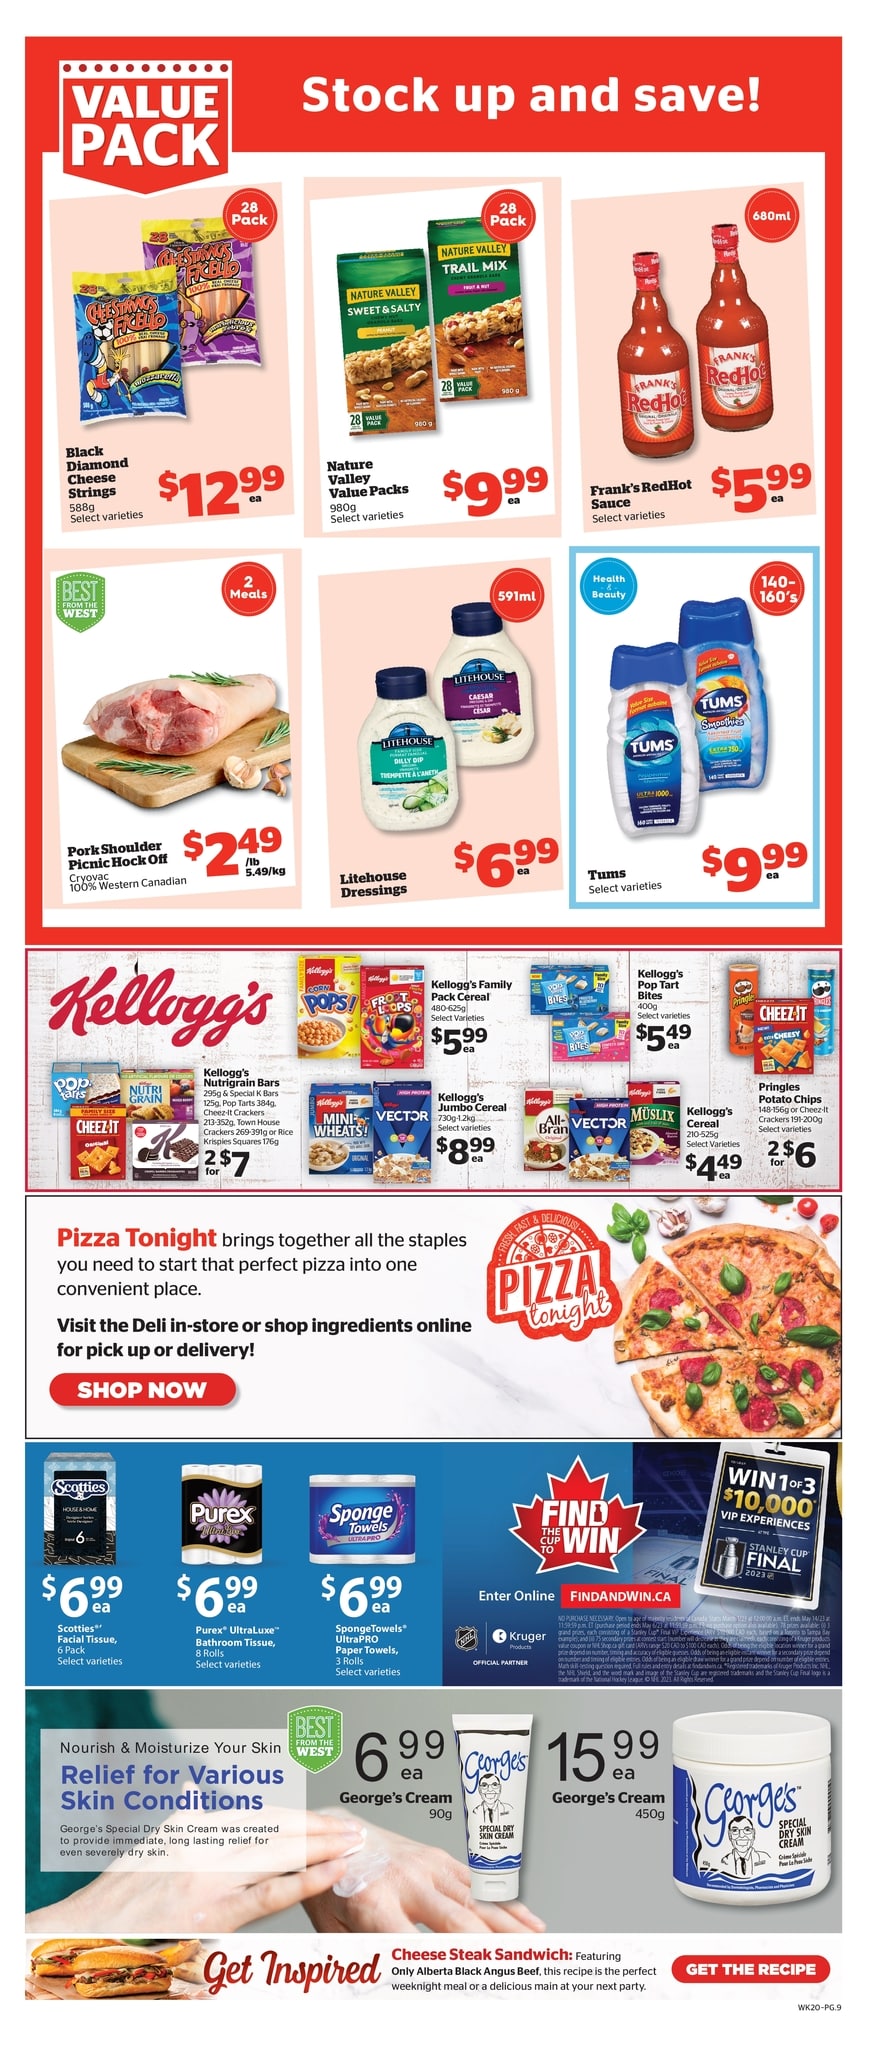 Calgary Co-op - Weekly Flyer Specials - Page 11